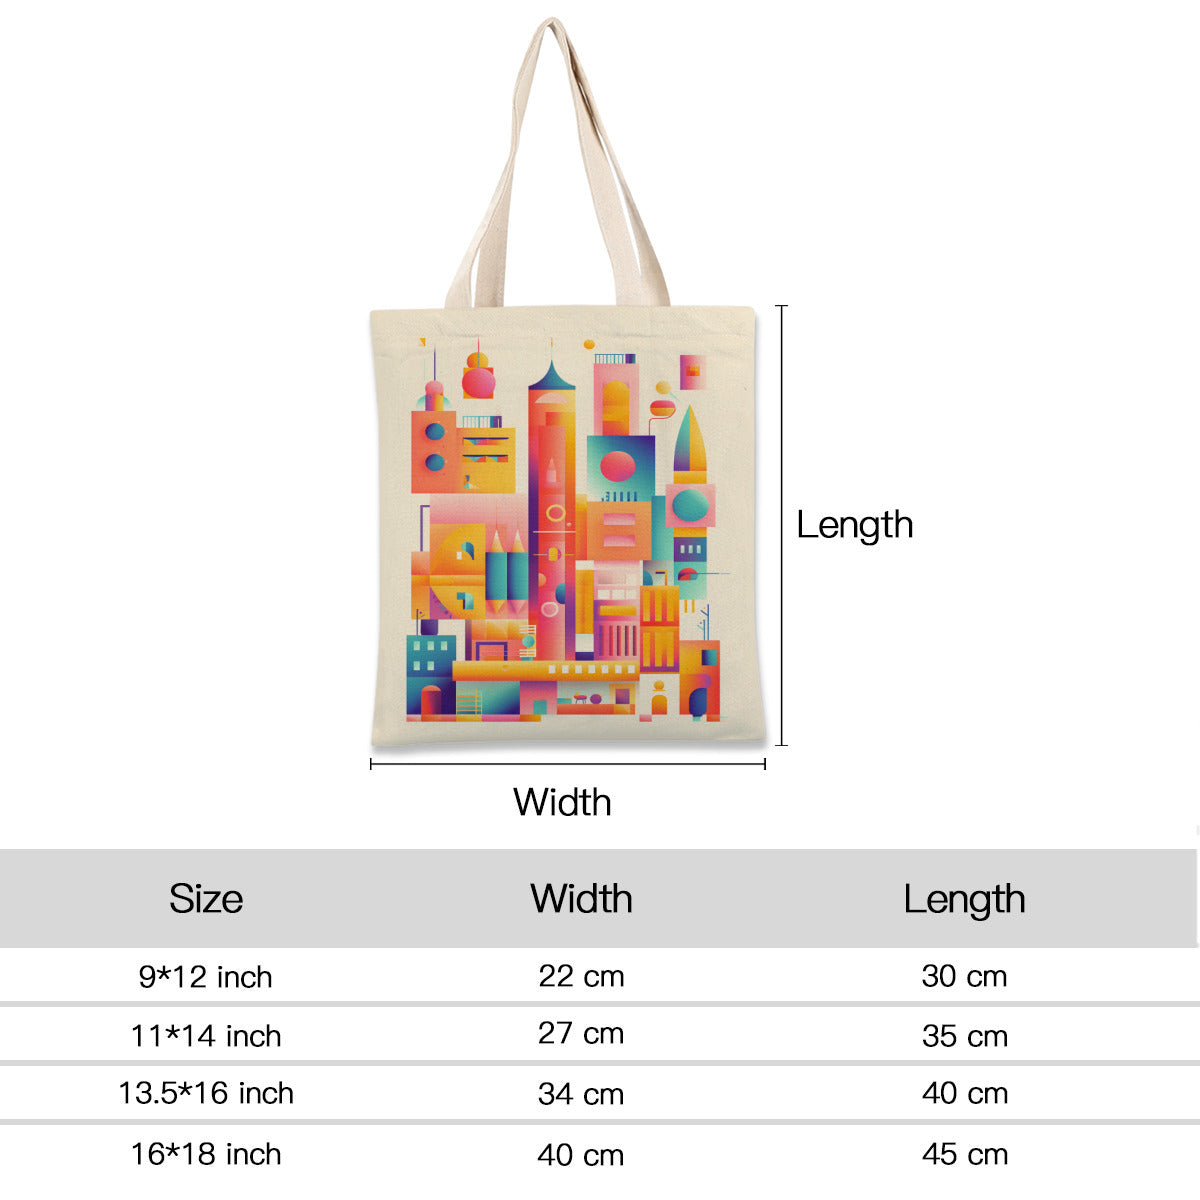 This canvas bag printed with cartoon castle has four sizes, which are 9*12 inch, 11*14 inch, 13.5*16 inch, 16*18 inch.